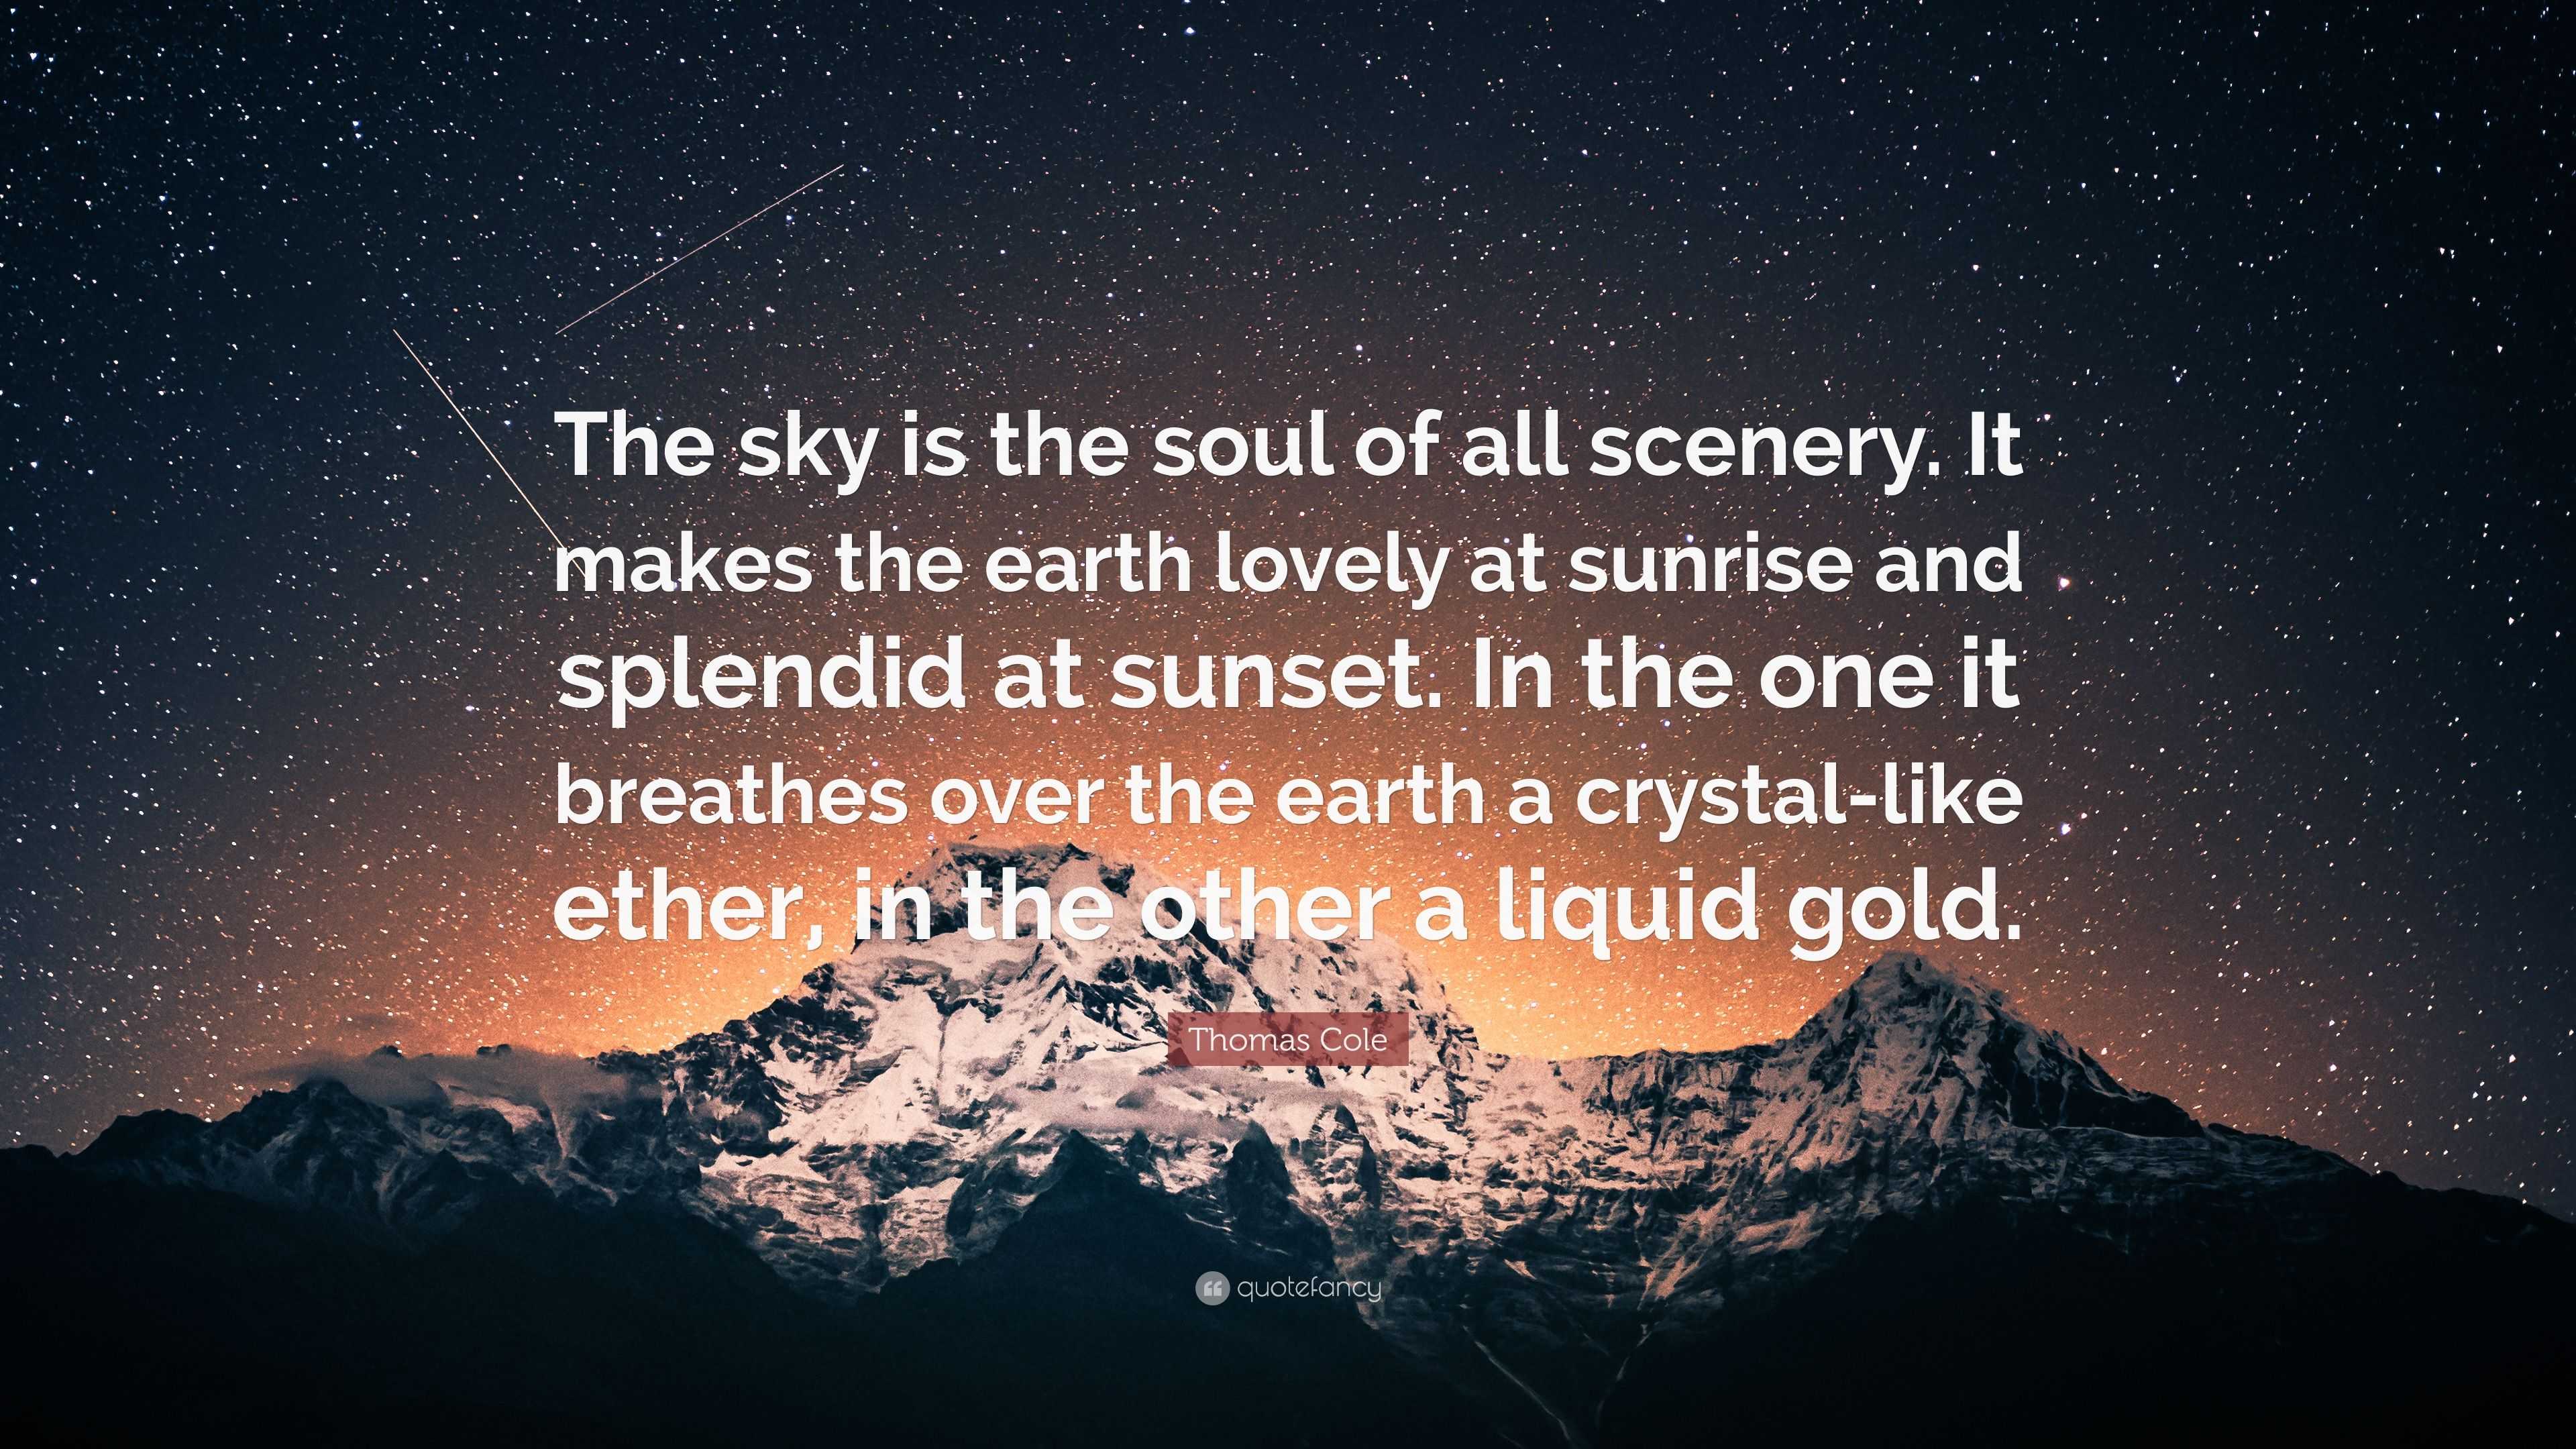 Thomas Cole Quote: “The sky is the soul of all scenery. It makes the earth  lovely at sunrise and splendid at sunset. In the one it breathes ...”